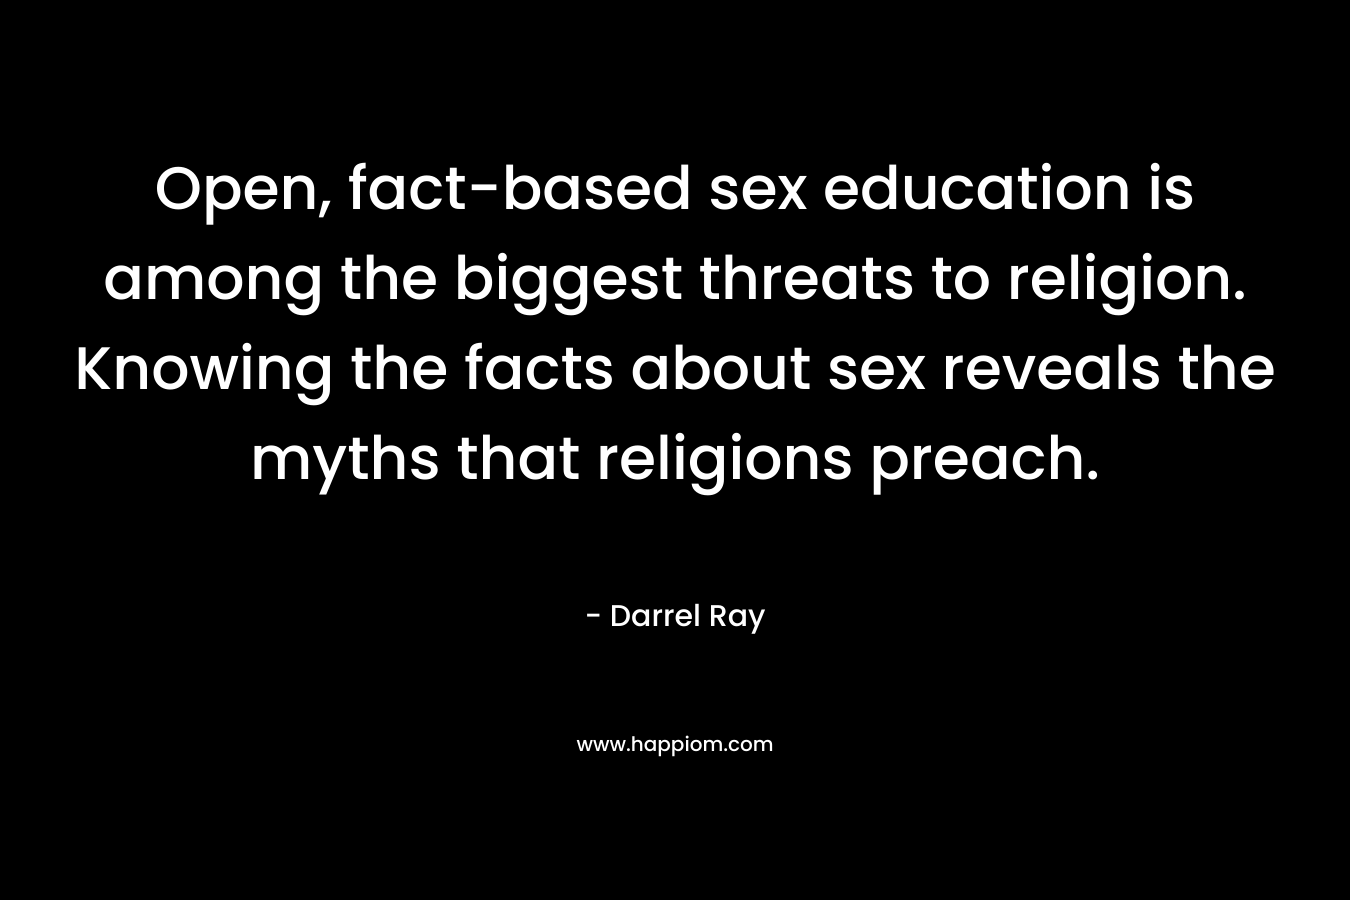 Open, fact-based sex education is among the biggest threats to religion. Knowing the facts about sex reveals the myths that religions preach. – Darrel Ray